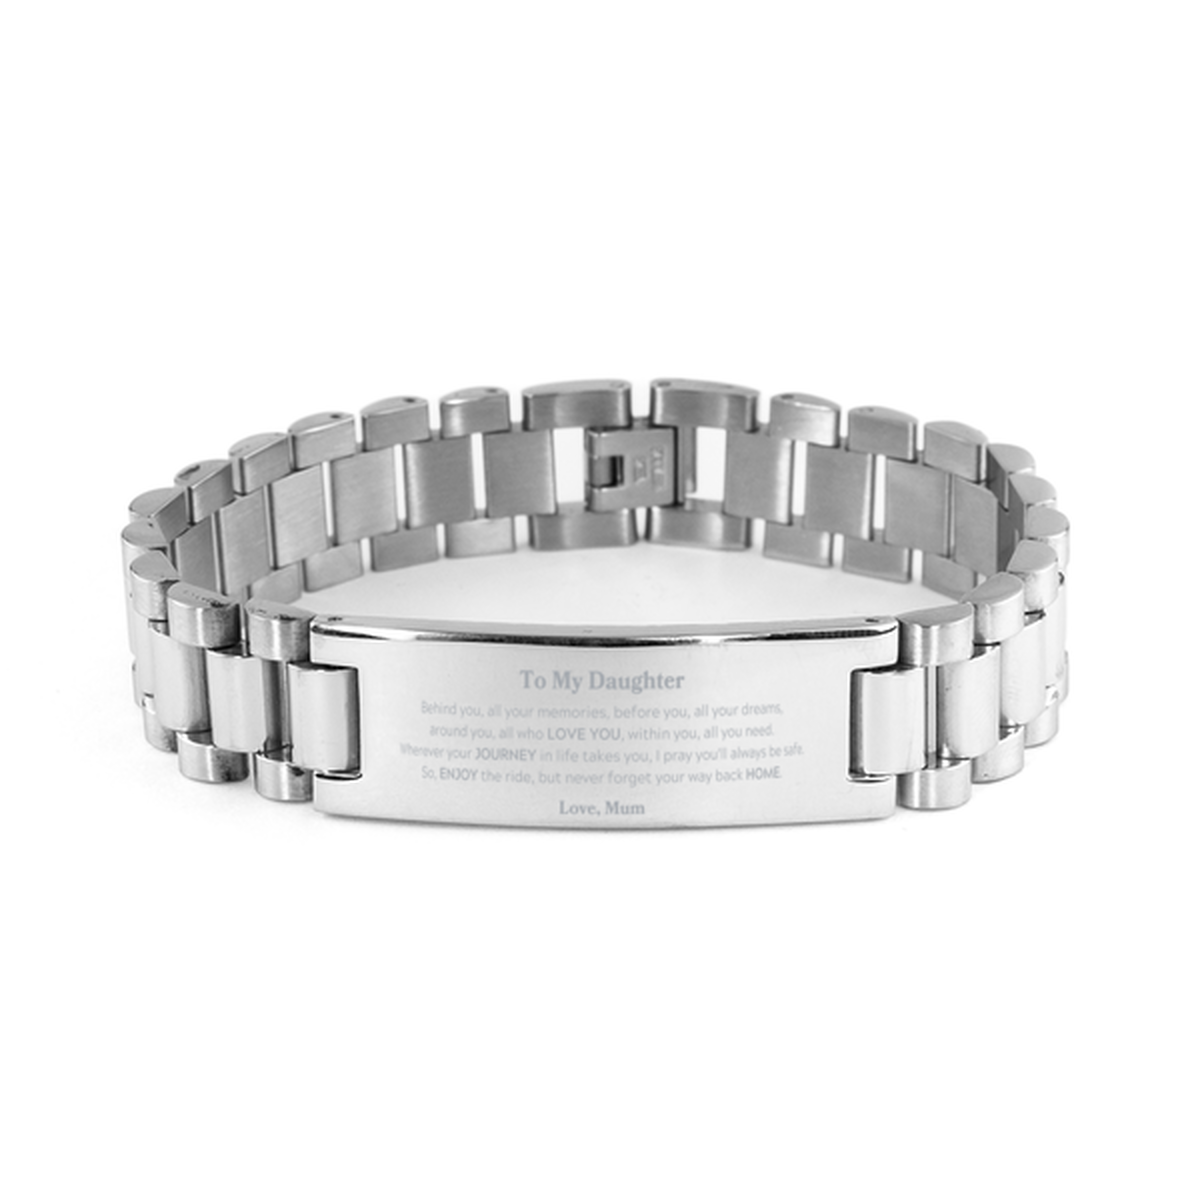 To My Daughter Graduation Gifts from Mum, Daughter Ladder Stainless Steel Bracelet Christmas Birthday Gifts for Daughter Behind you, all your memories, before you, all your dreams. Love, Mum